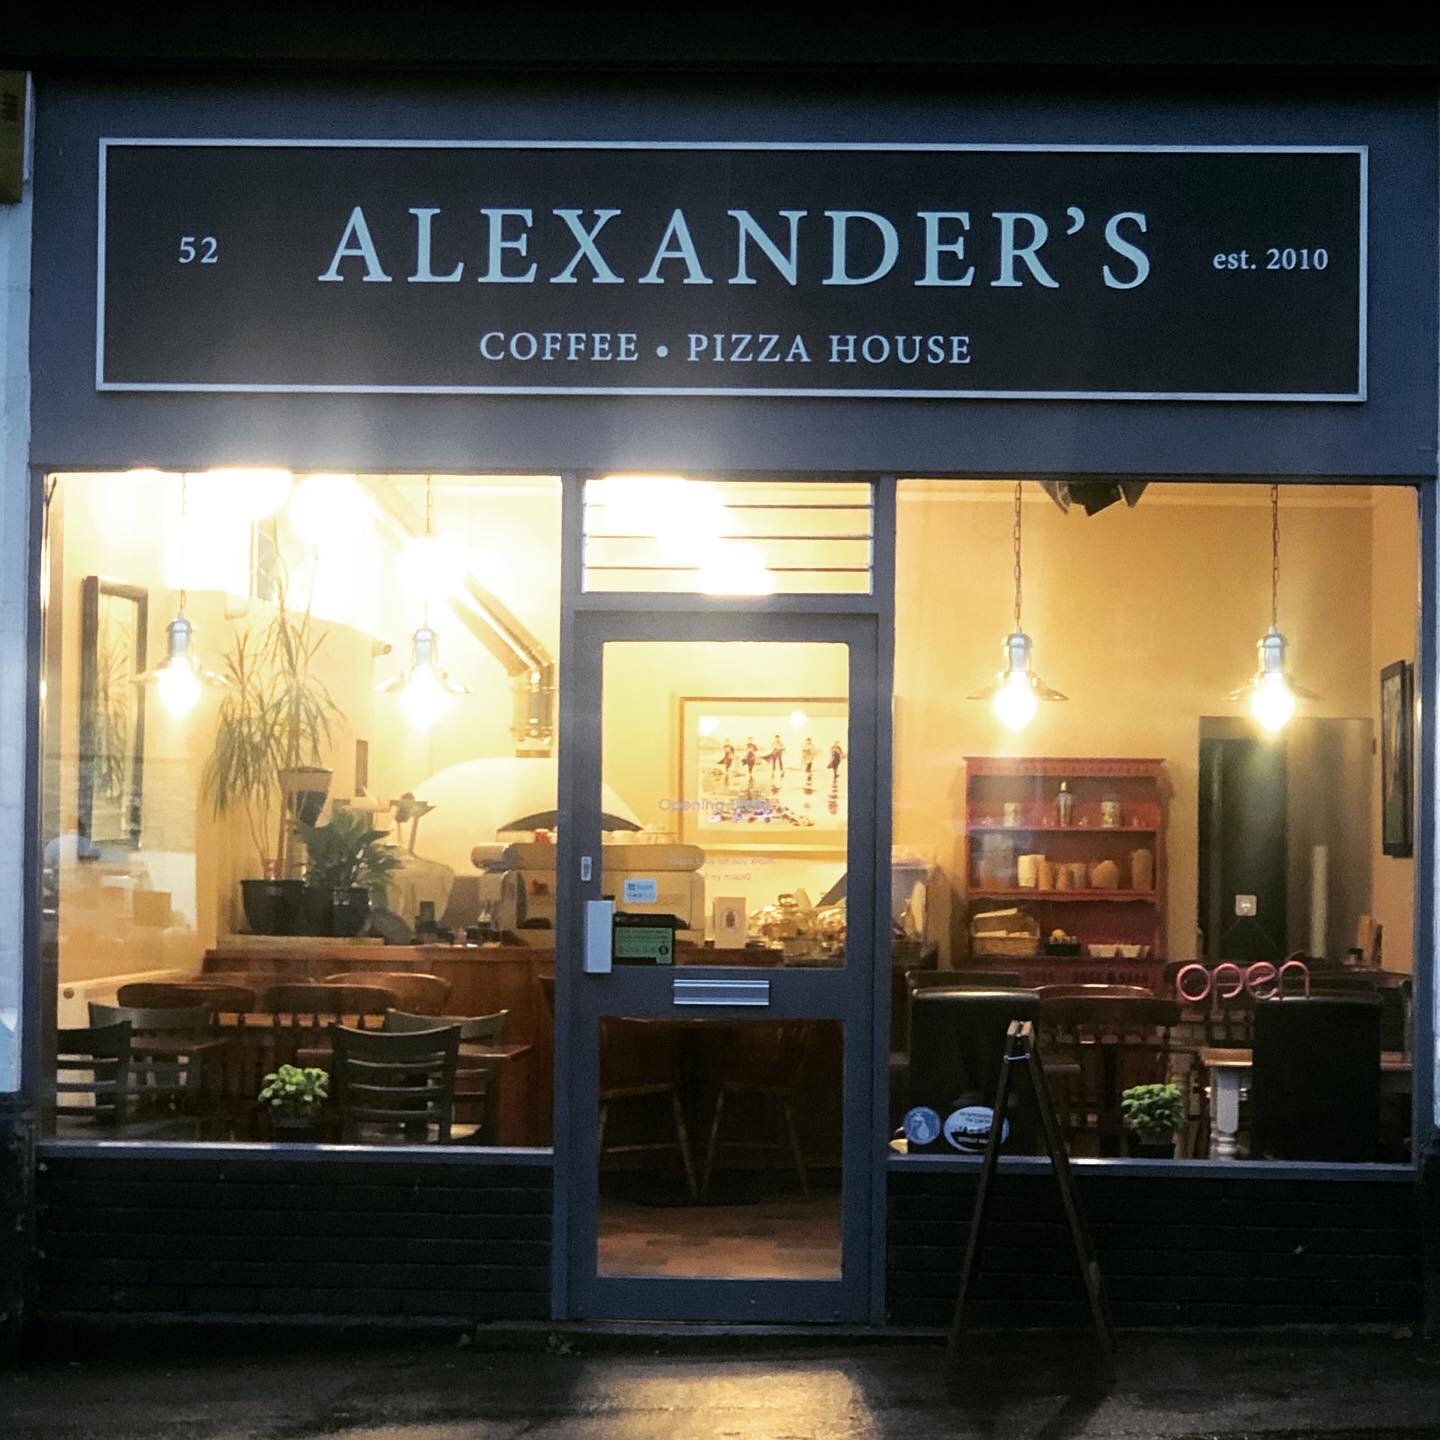 Alexanders Cafe & Pizza House